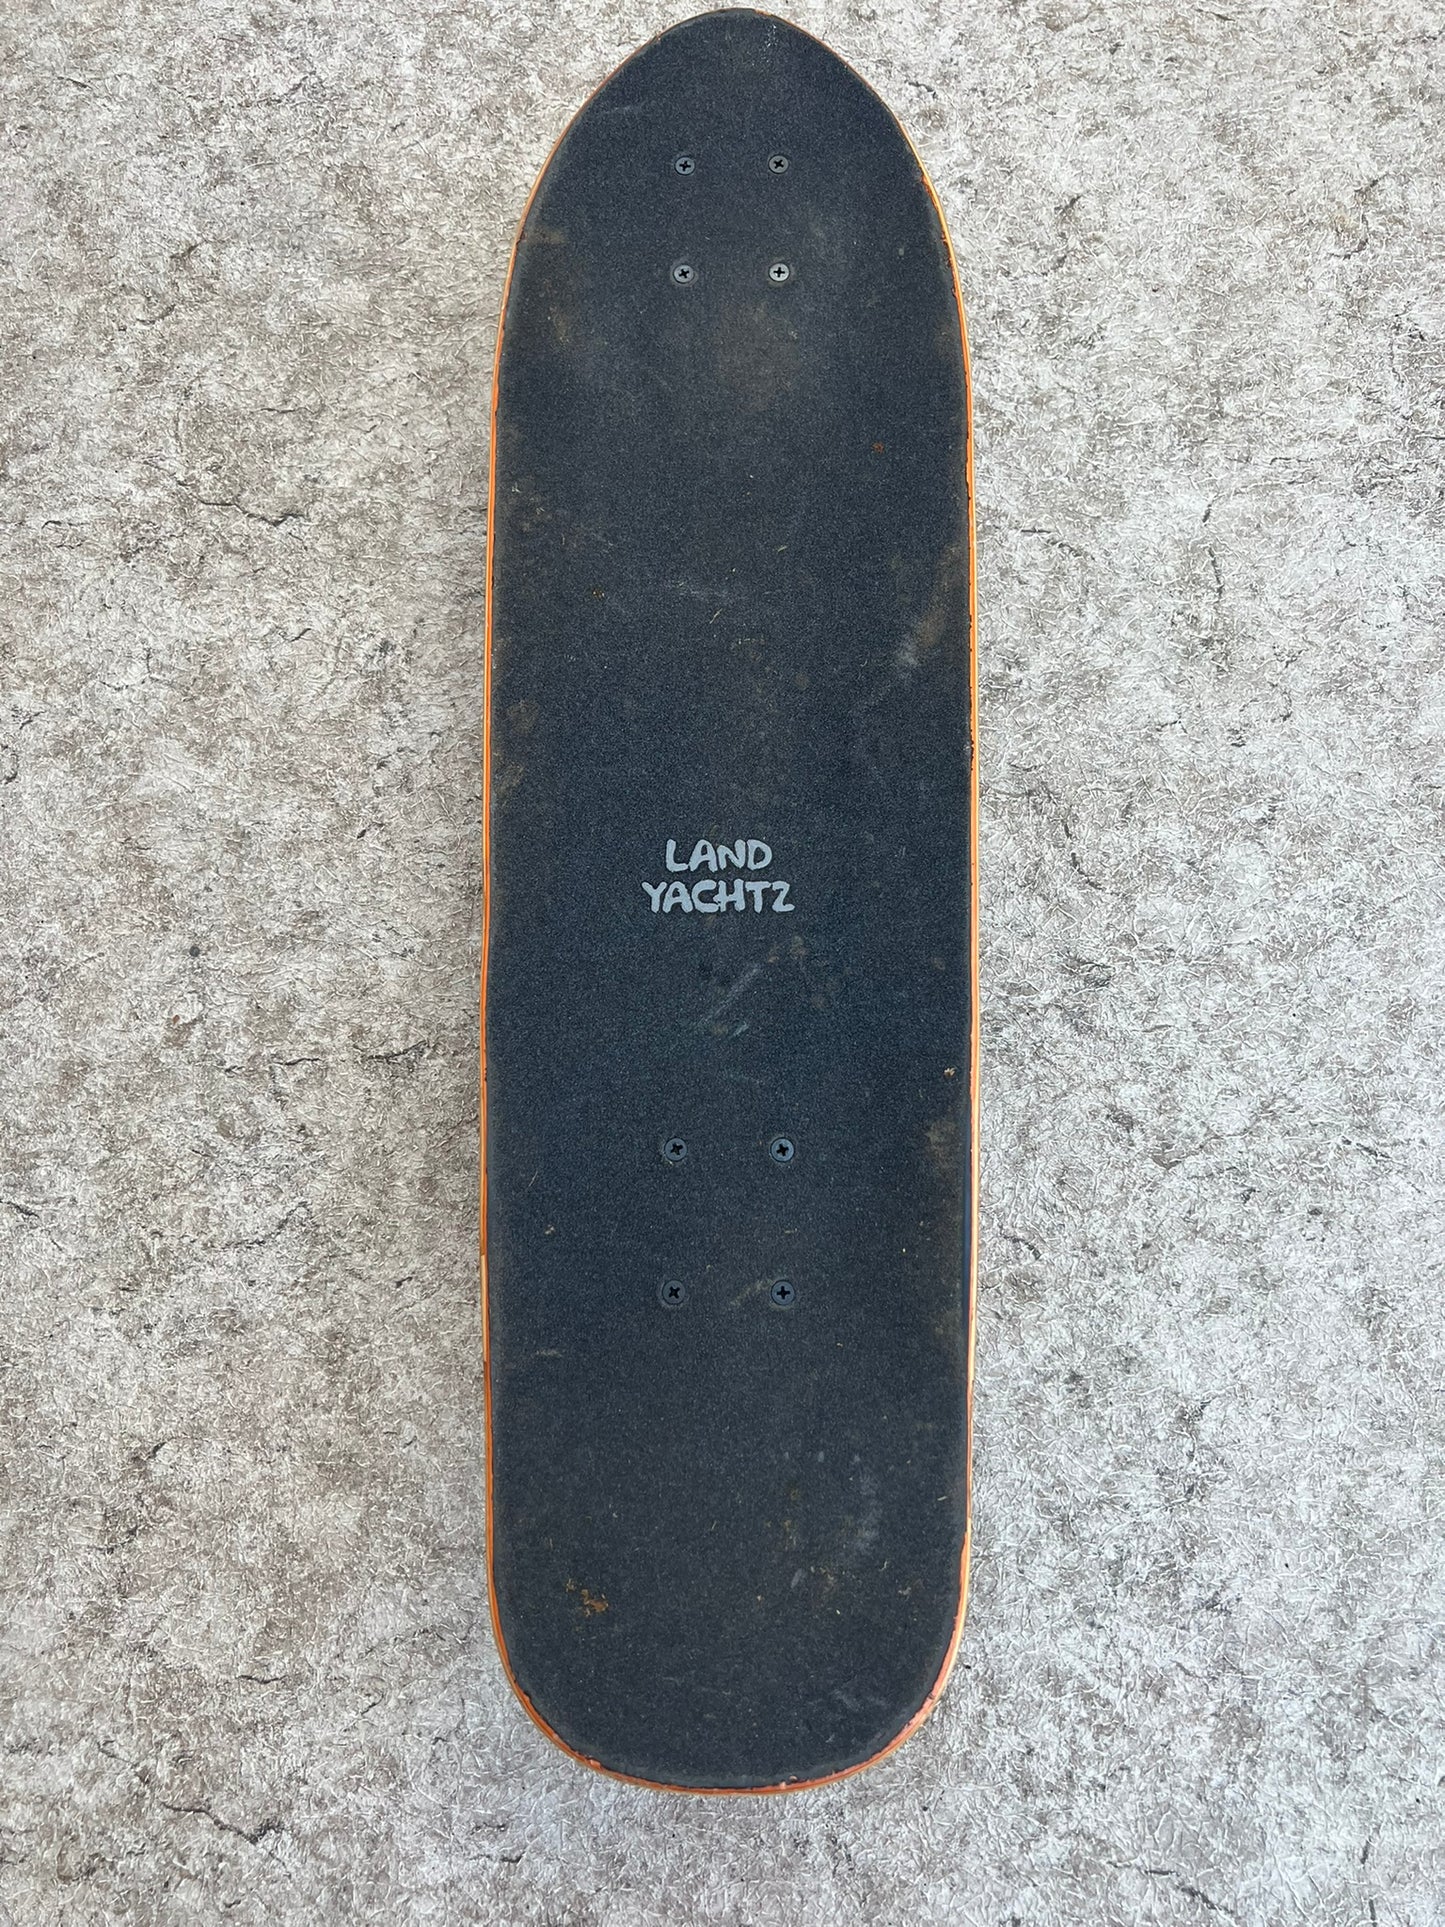 Land Yachtz Longboard Skateboard Outstanding Quality Used a couple of times